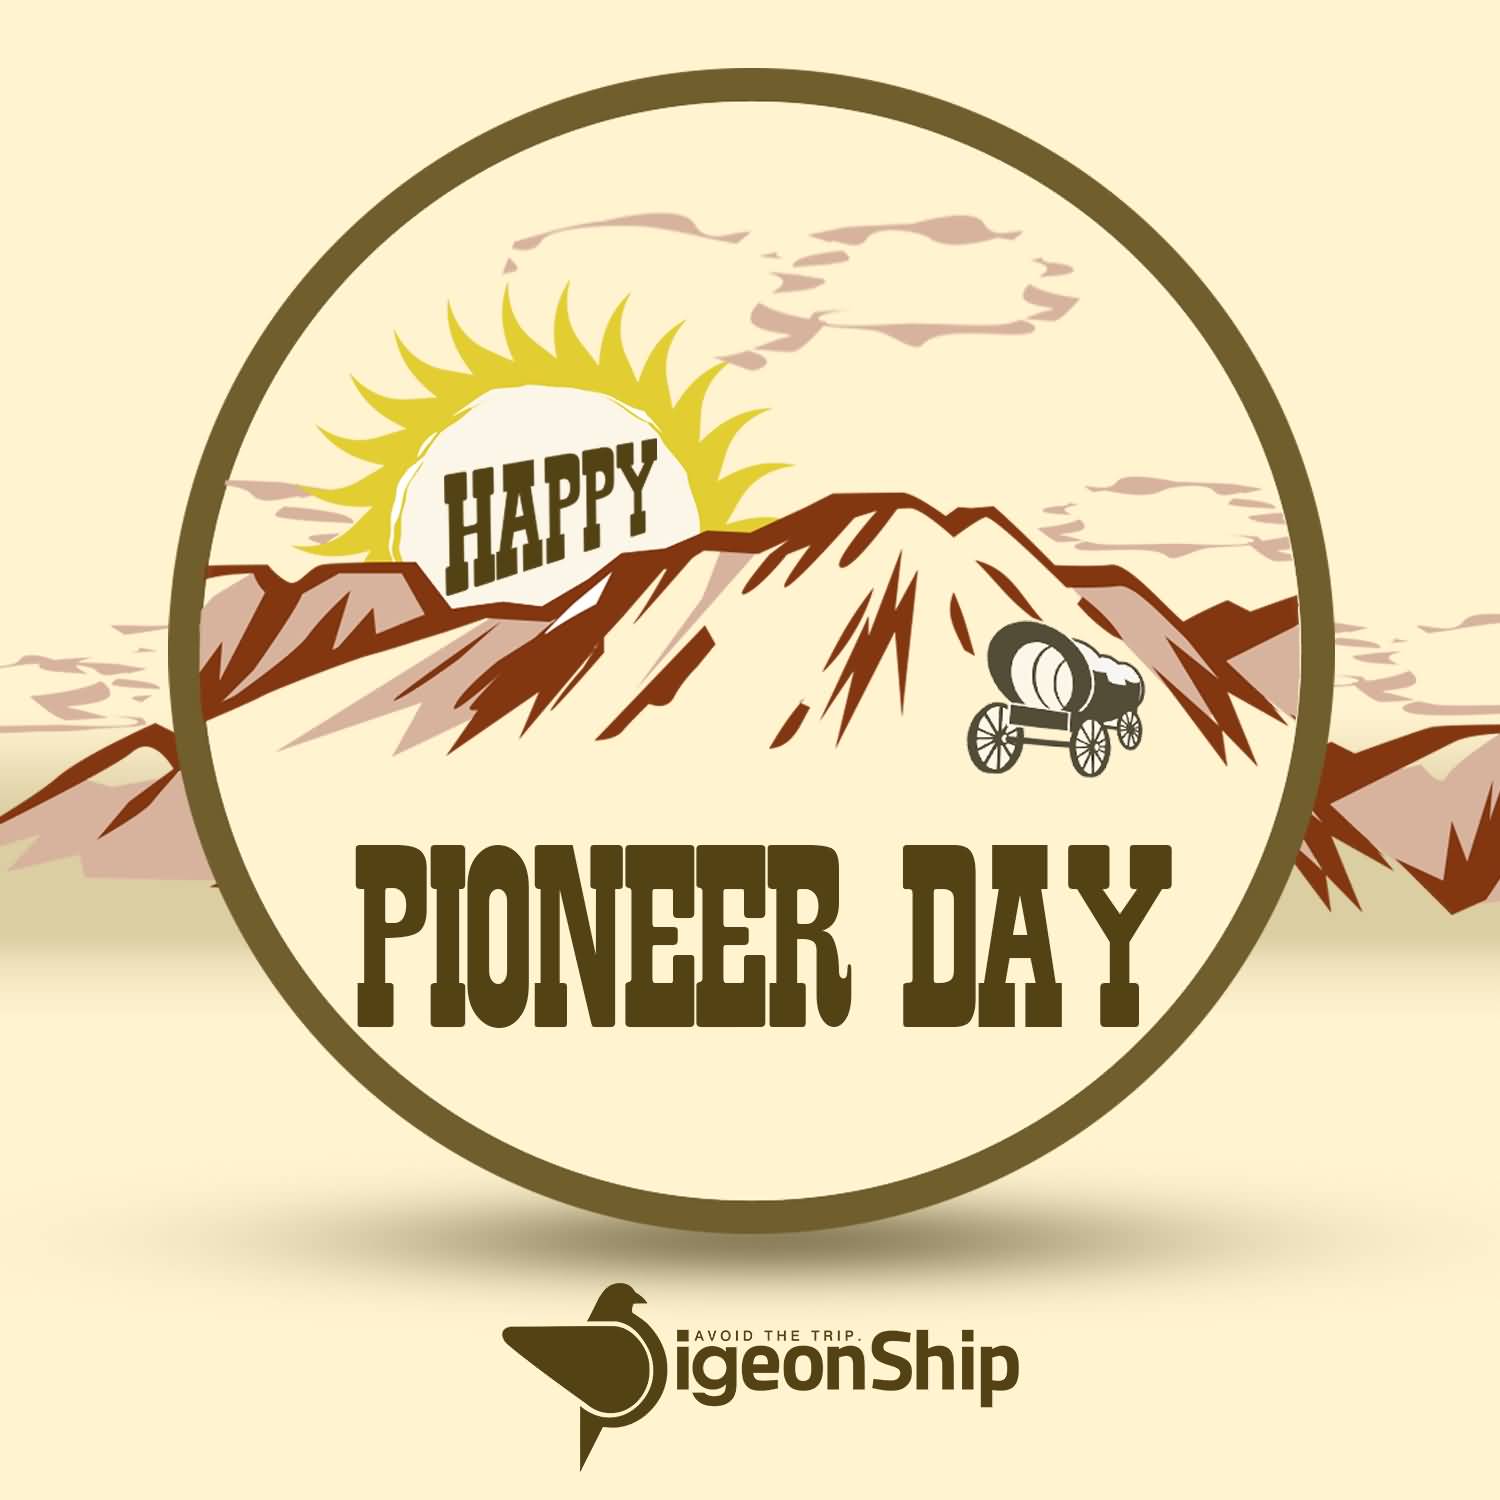 Happy Pioneer Day Image